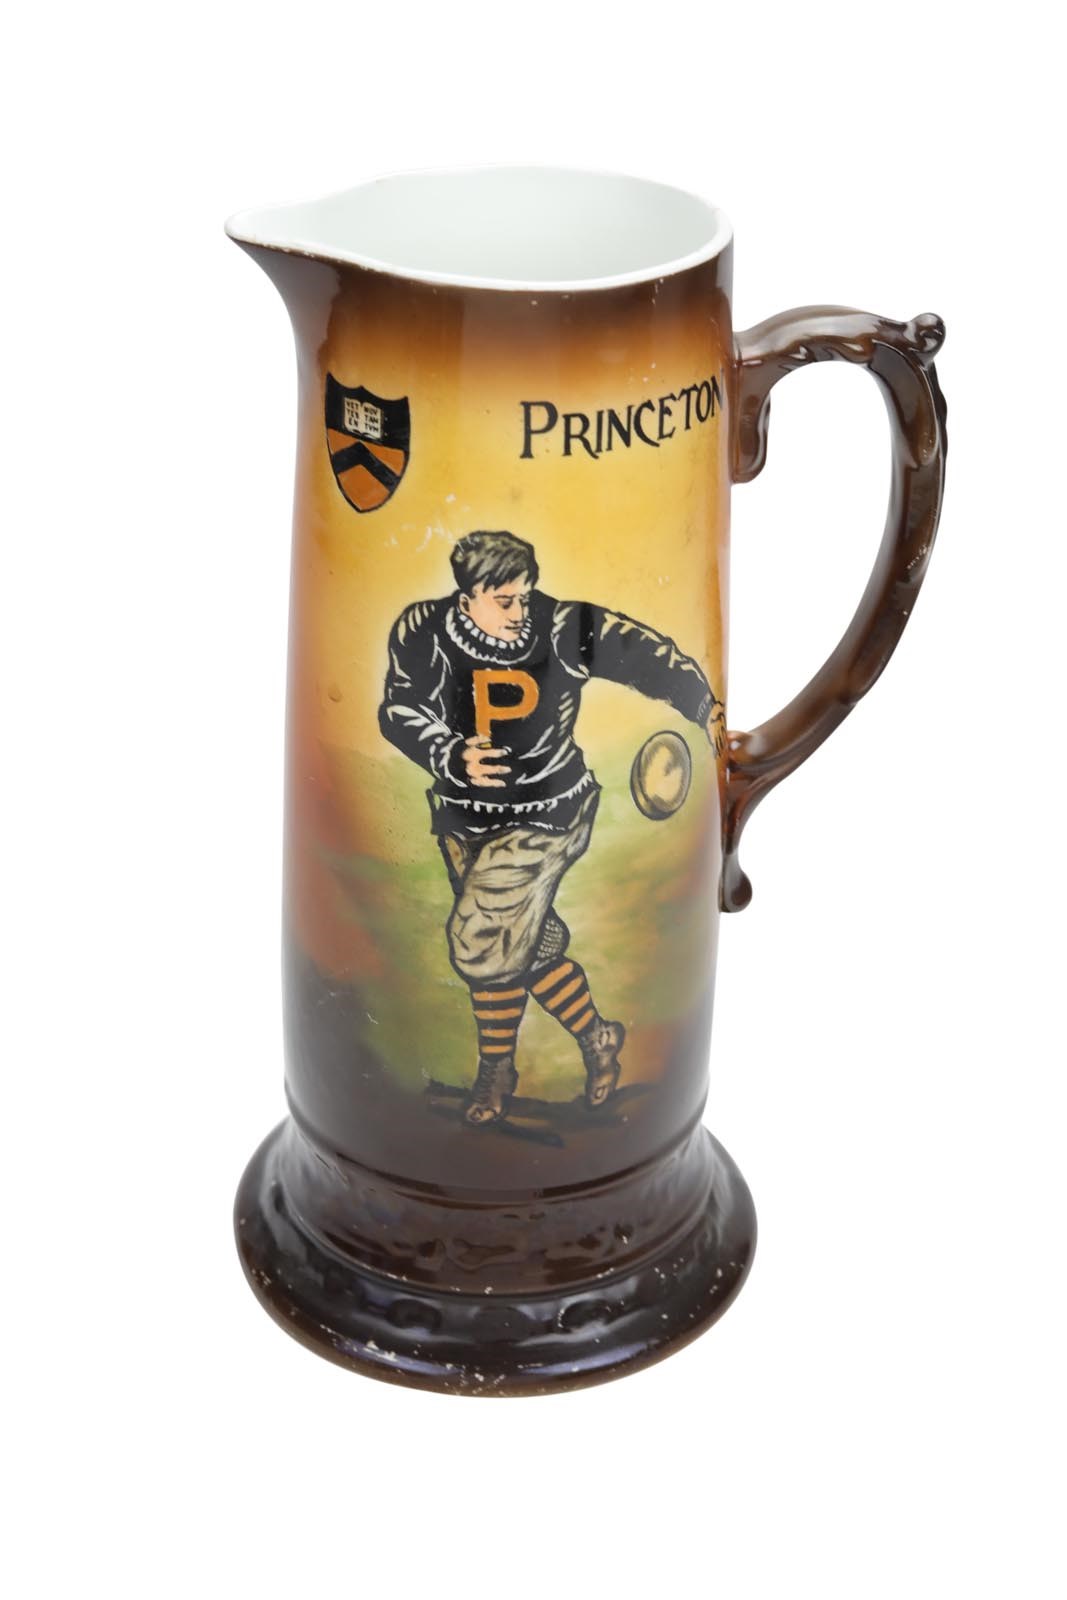 Early 1900's Princeton Football Large Stein